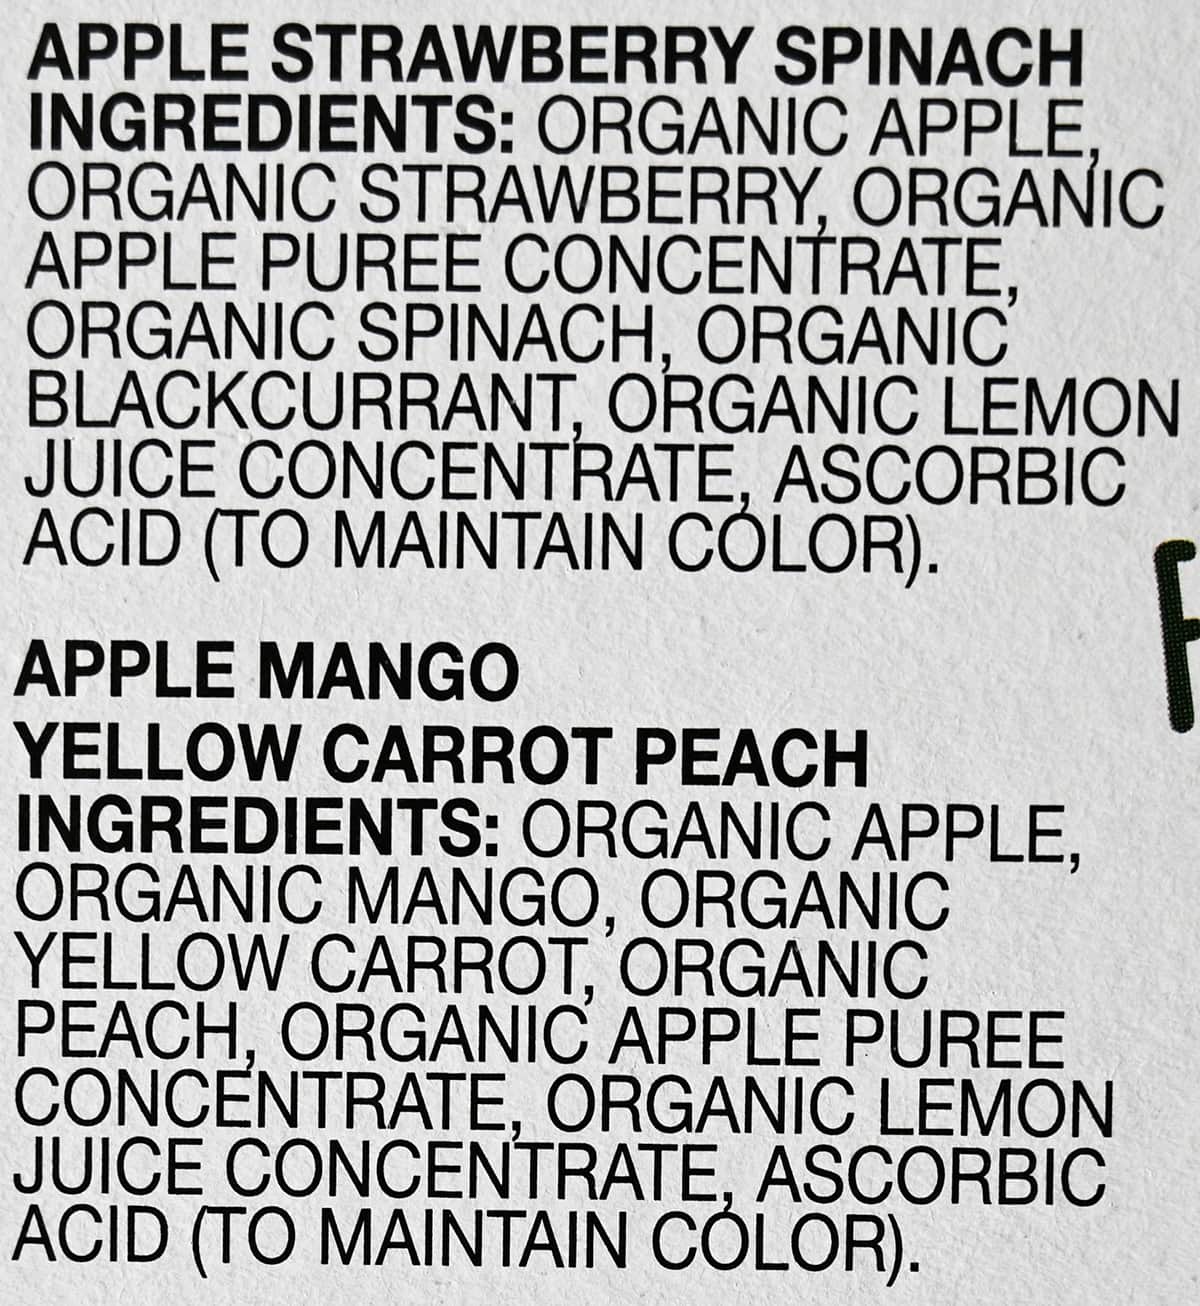 Image of the ingredients list for the pouches from the back of the box.